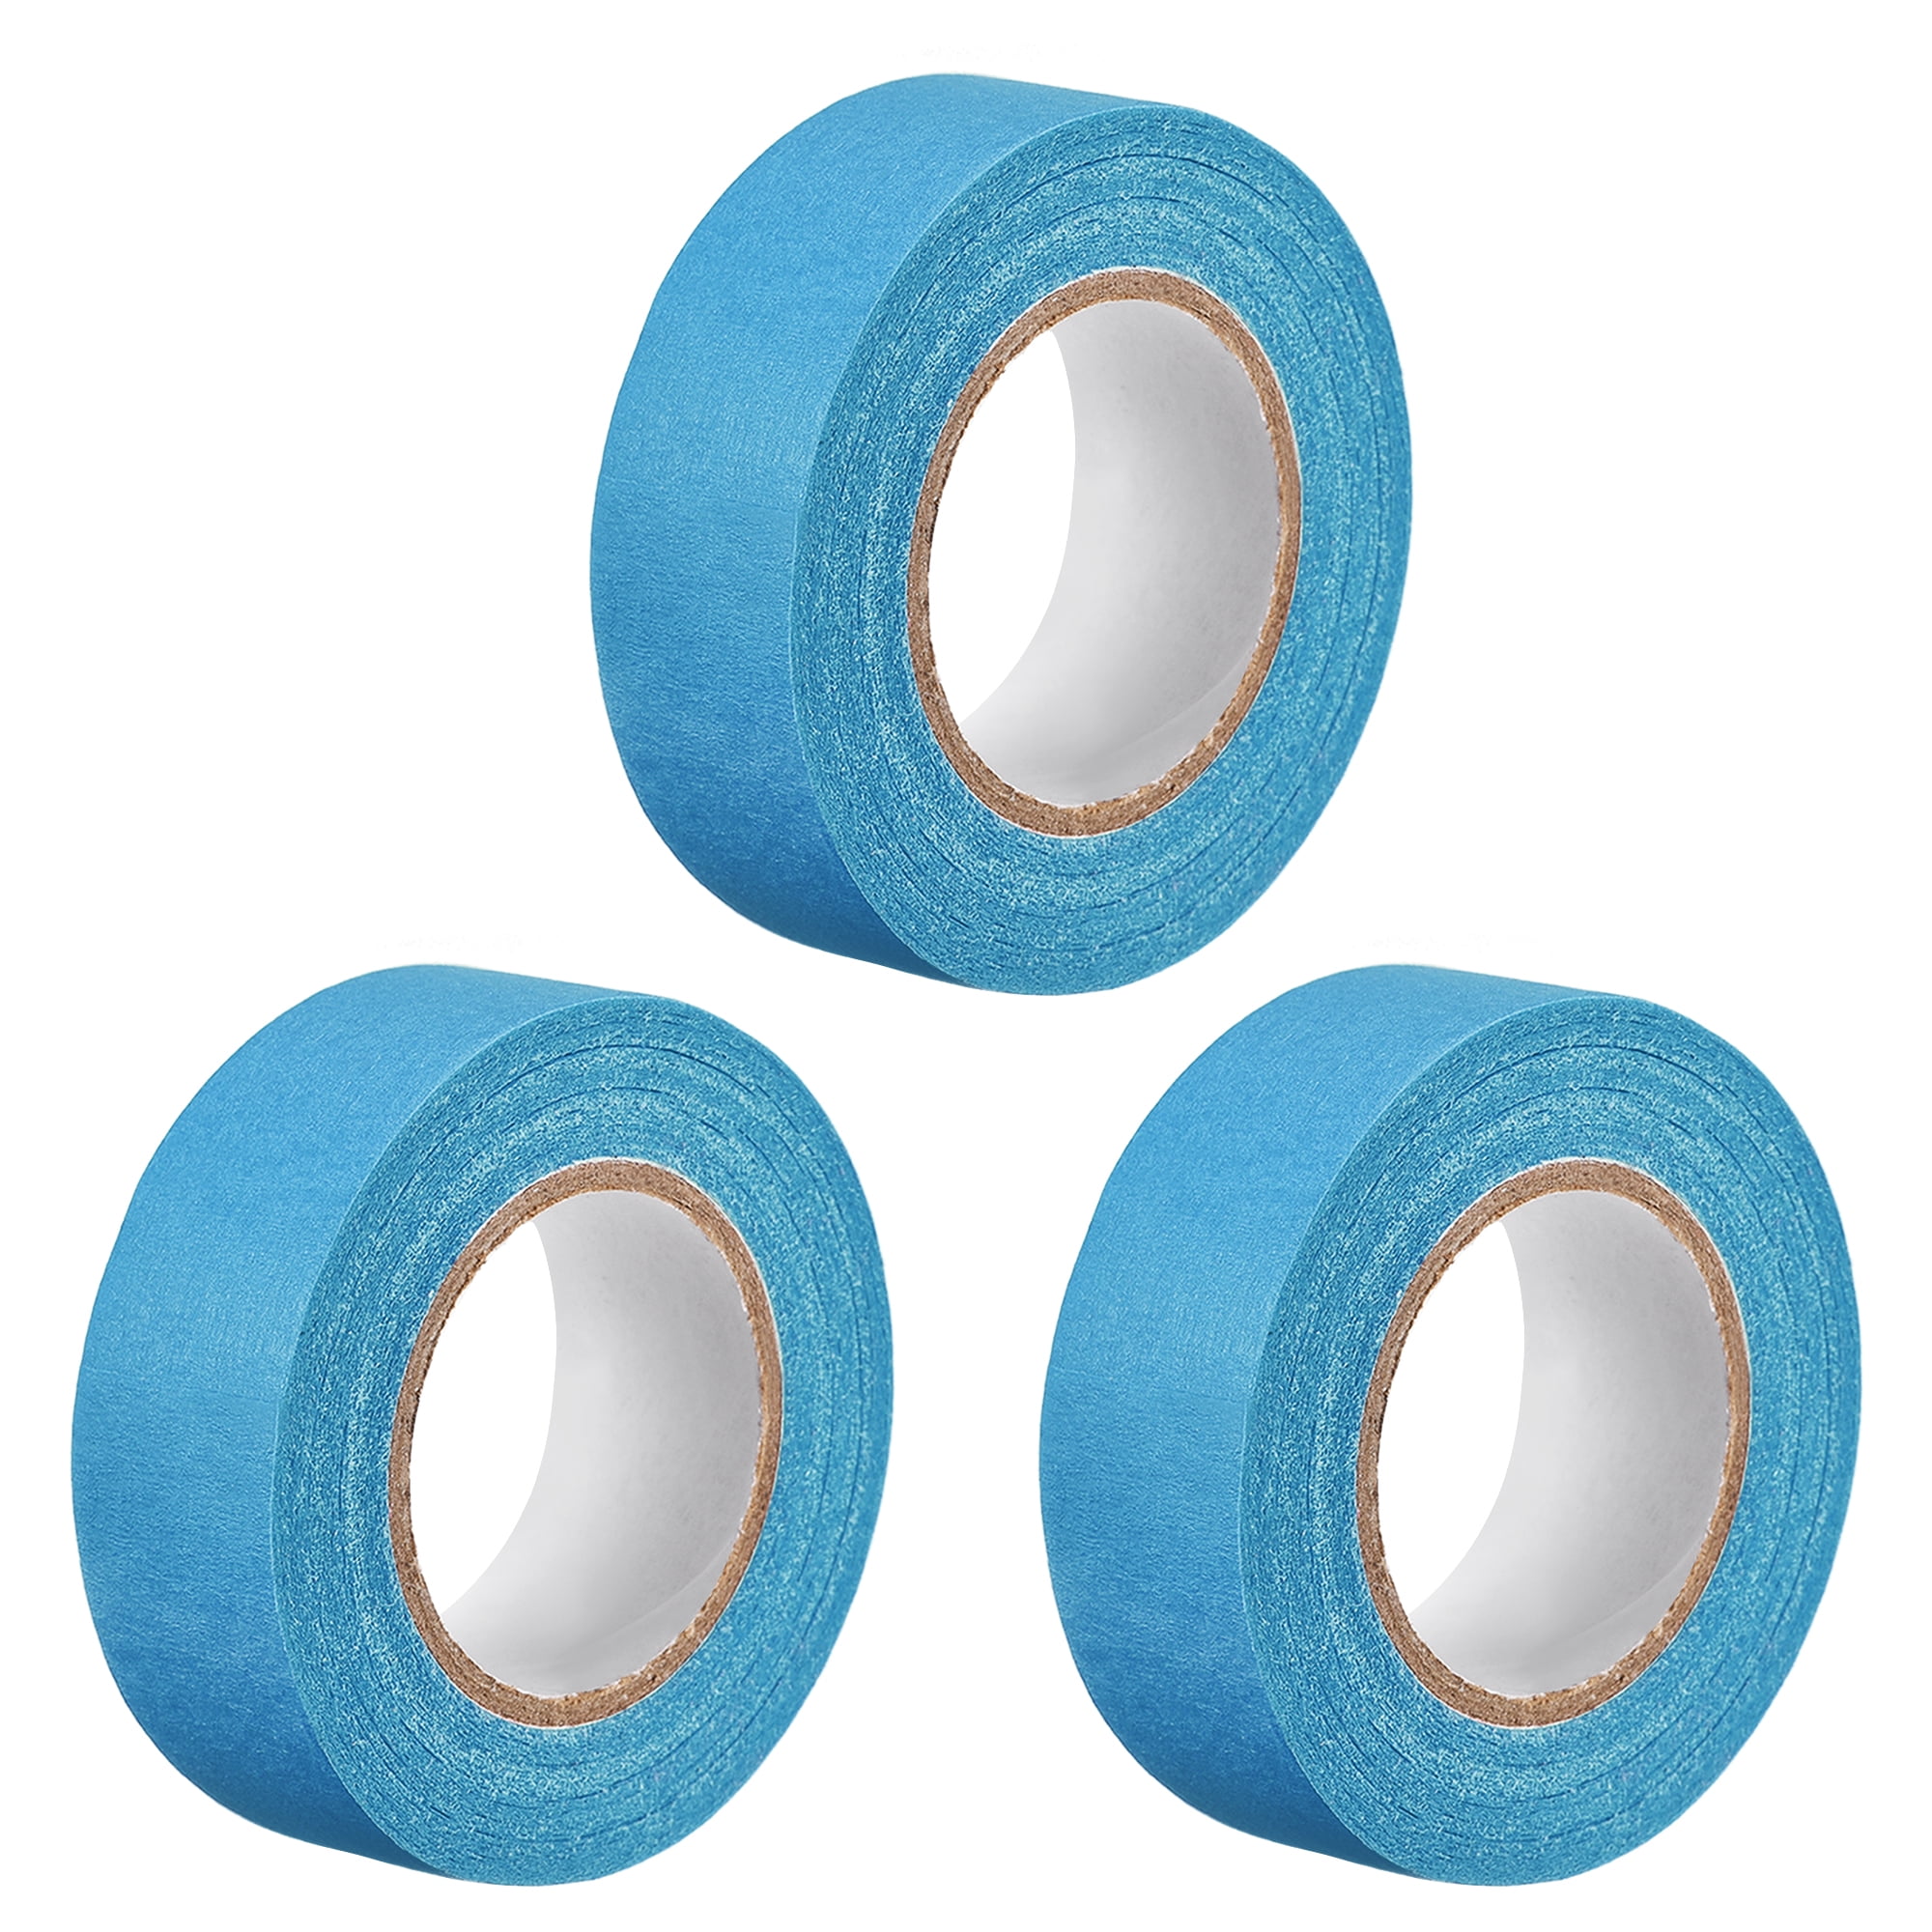 50mm 2 inch Wide 20m 21 Yards Masking Tape Painters Tape Rolls Light Blue